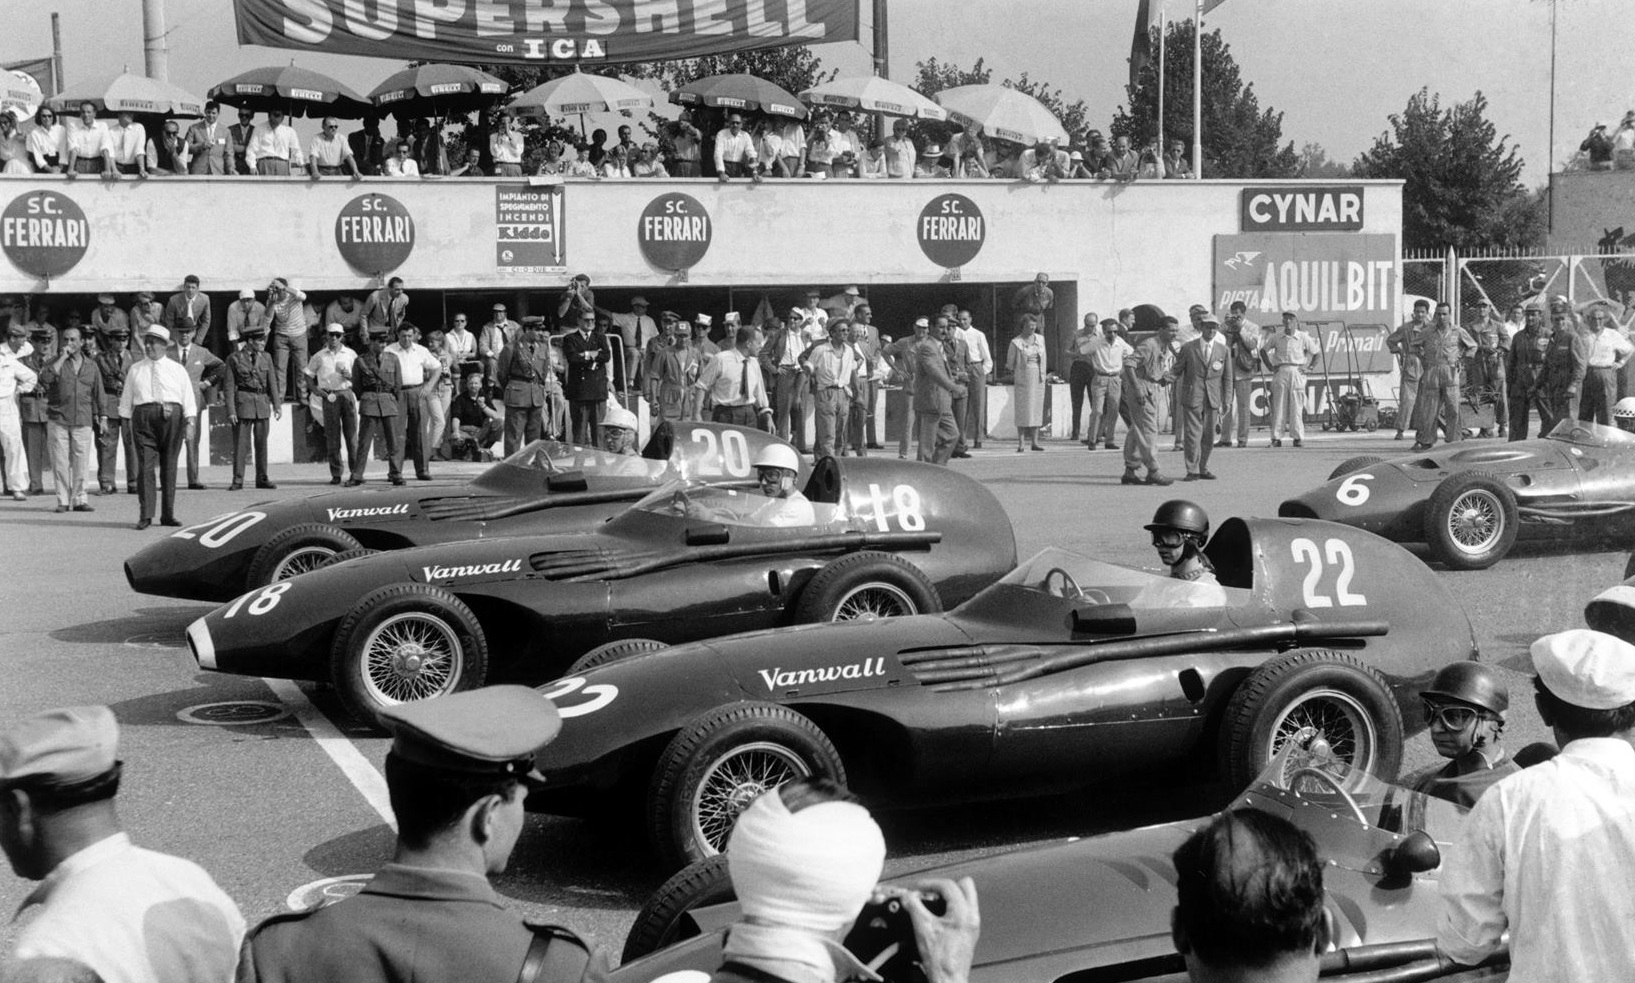 Tony Brooks, Stirling Moss and Stuart Lewis-Evans at the Grand Prix of Italy in Monza on 9 September 1957.